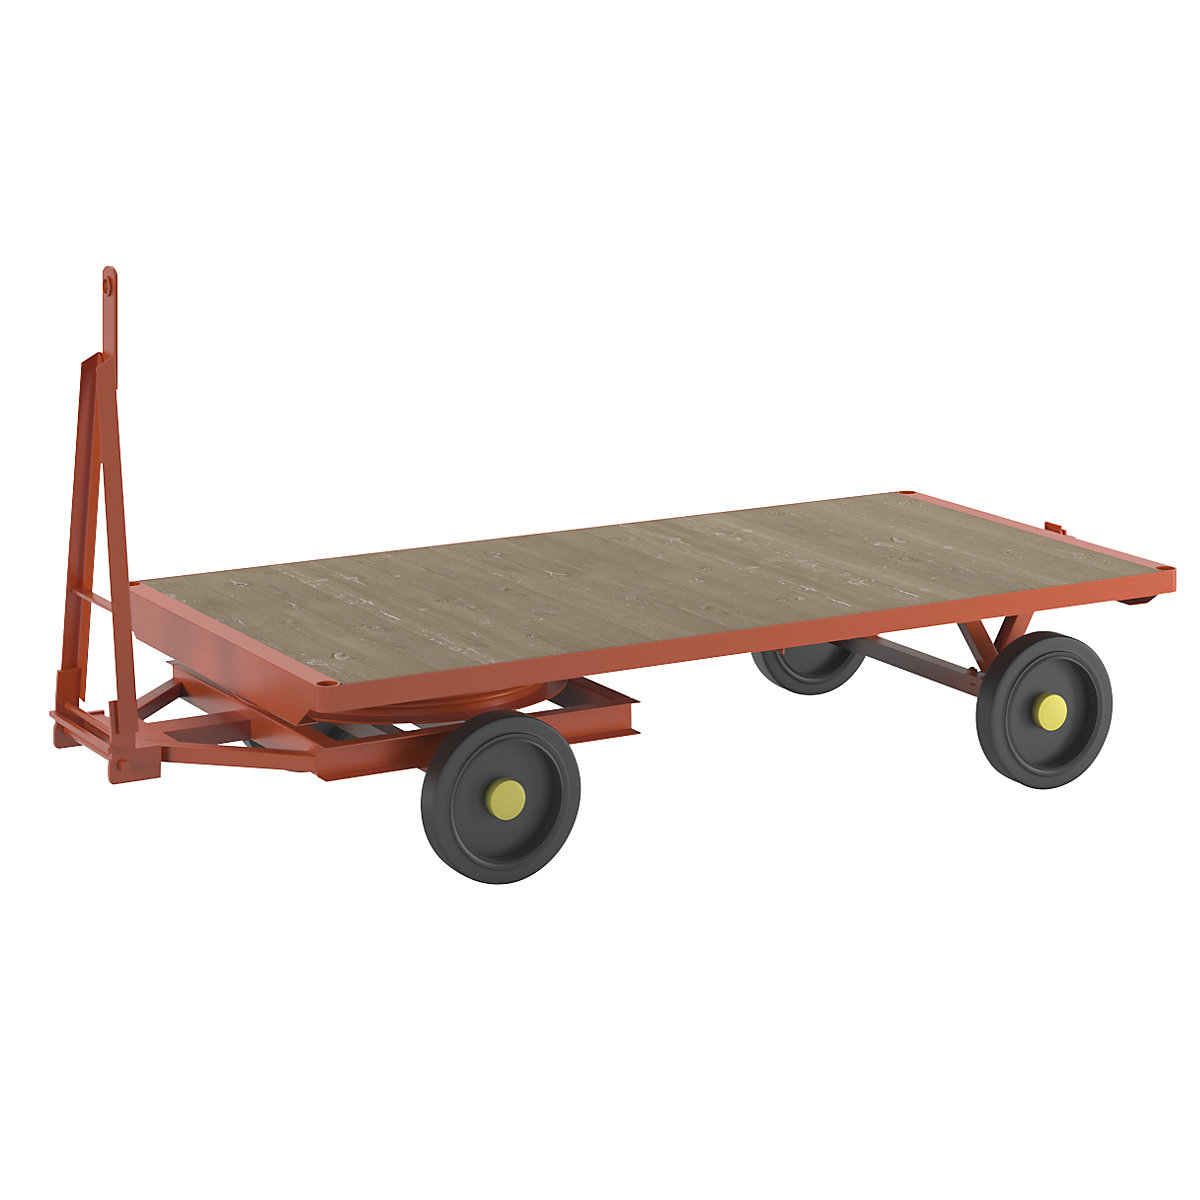 Trailer, 2-wheel turntable steering, max. load 2 t, platform 2.5 x 1.25 m, solid rubber tyres-13